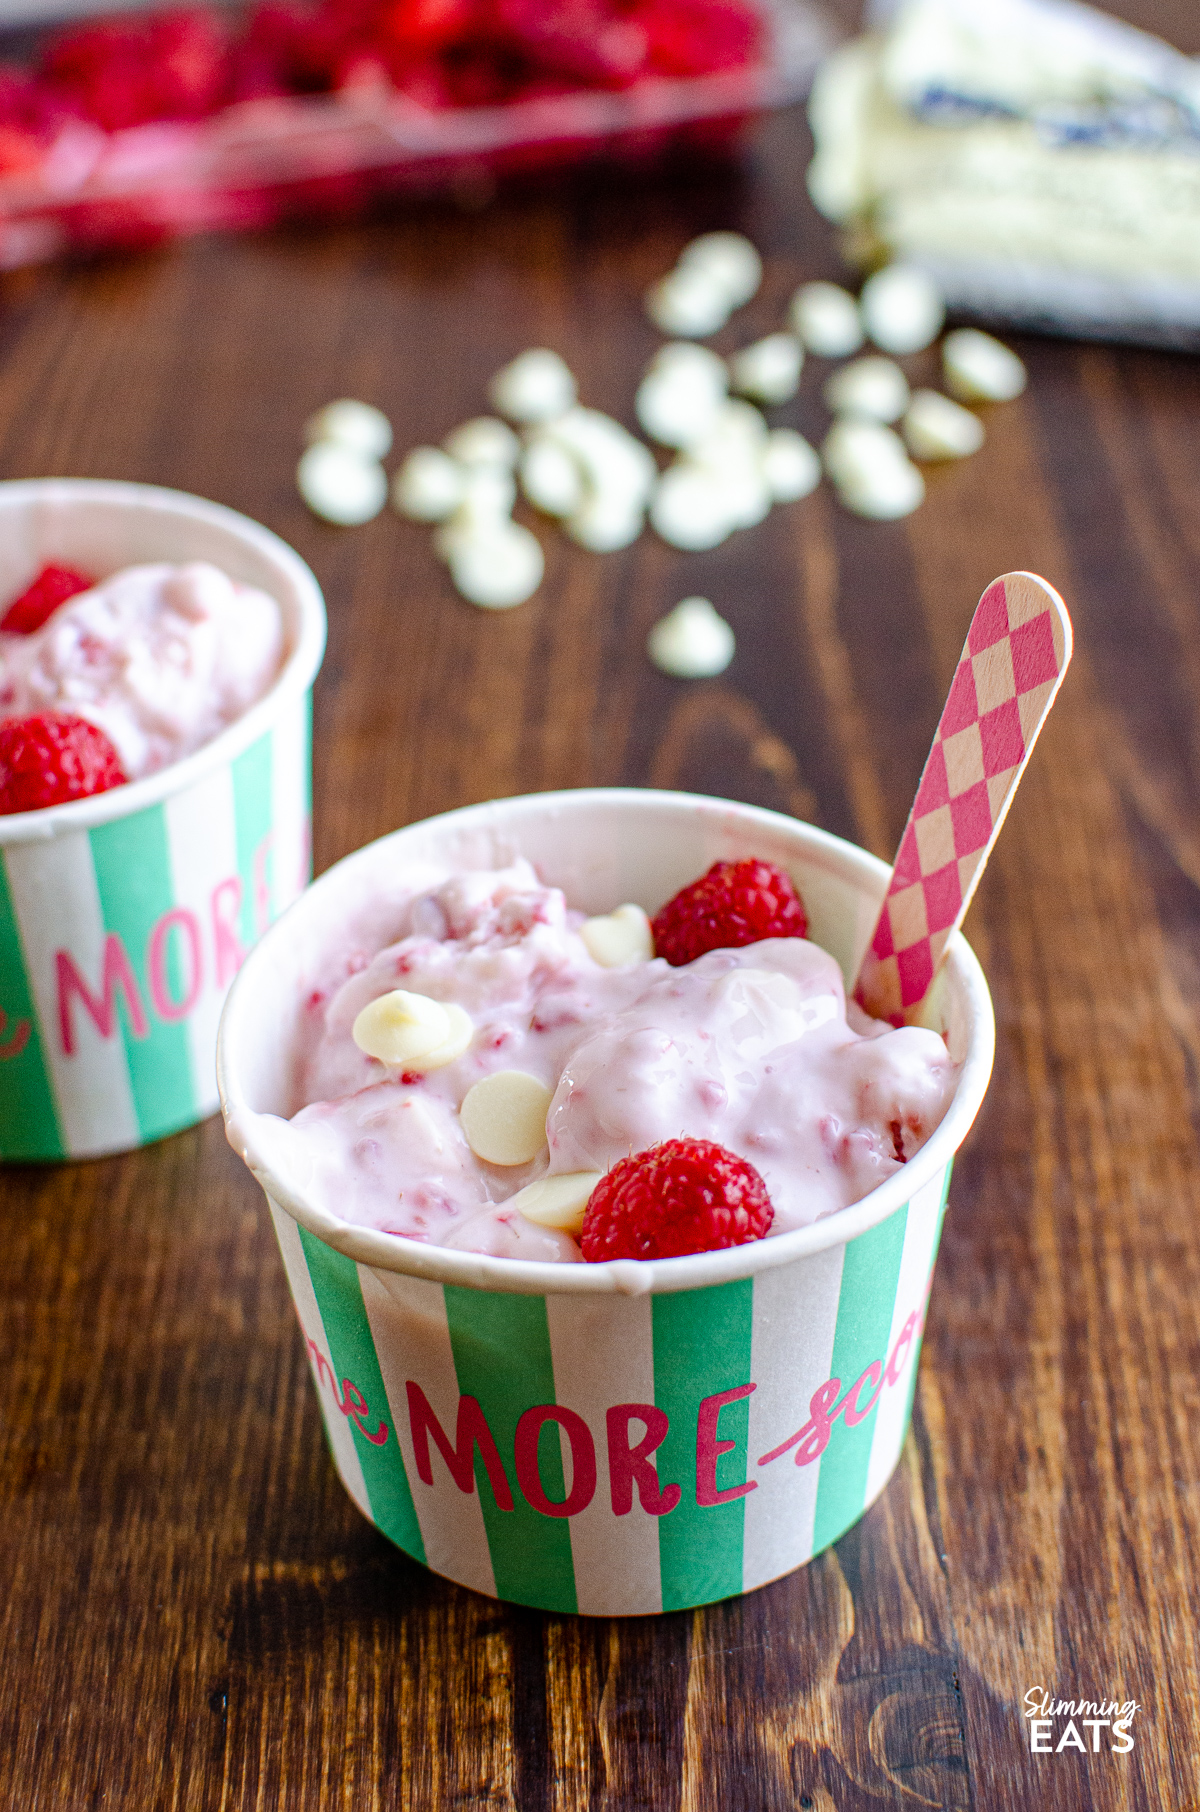 Raspberry and White Chocolate Frozen Yoghurt in a icecream tub with pink diamond patterned wooden spoon, and scattered white chocolate chips in background